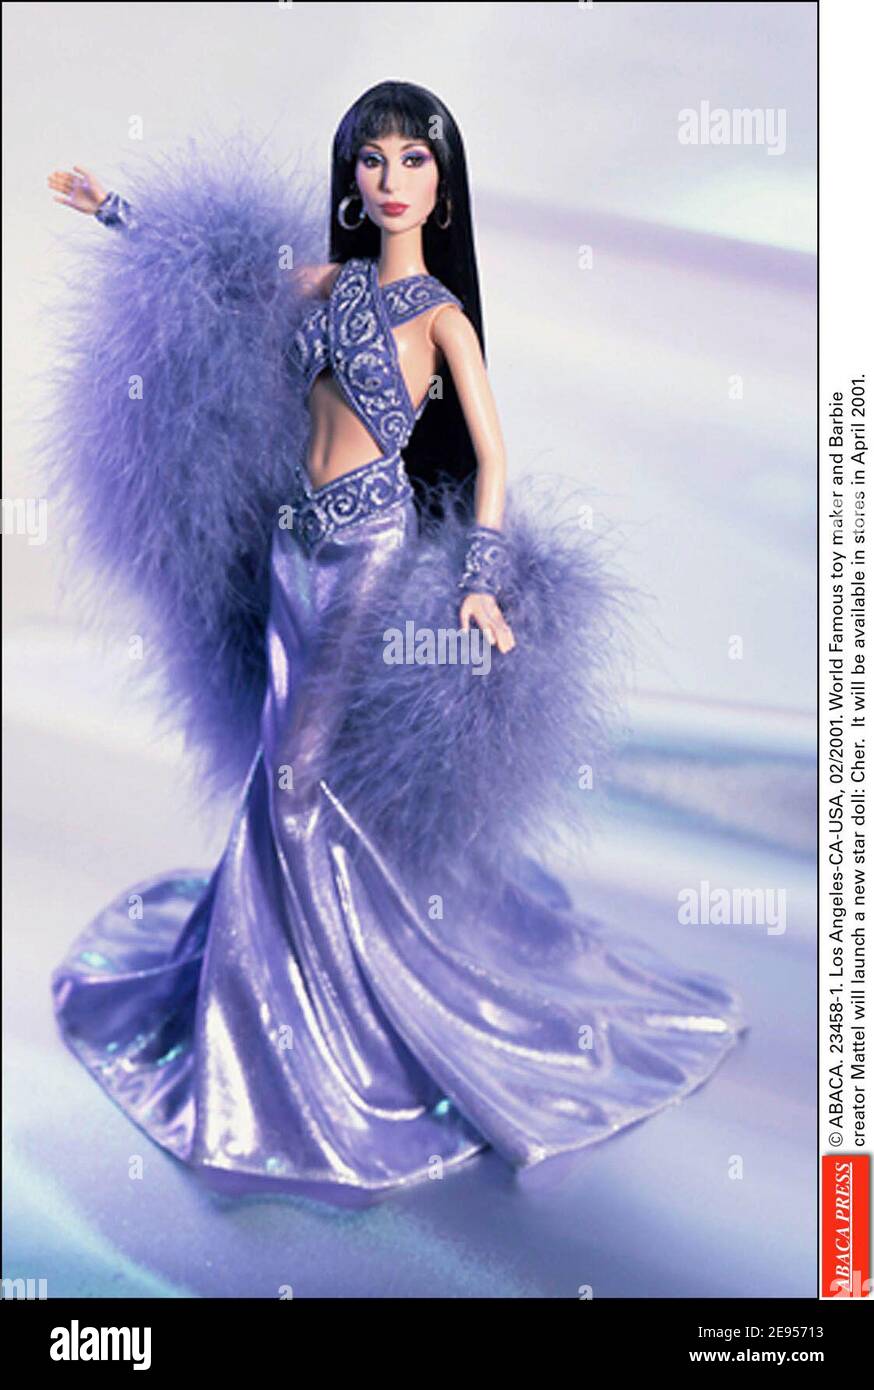 ABACA. 23458-1. Los Angeles-CA-USA, 02/2001. World Famous toy maker and  Barbie creator Mattel will launch a new star doll: Cher. It will be  available in stores in April 2001 Stock Photo - Alamy